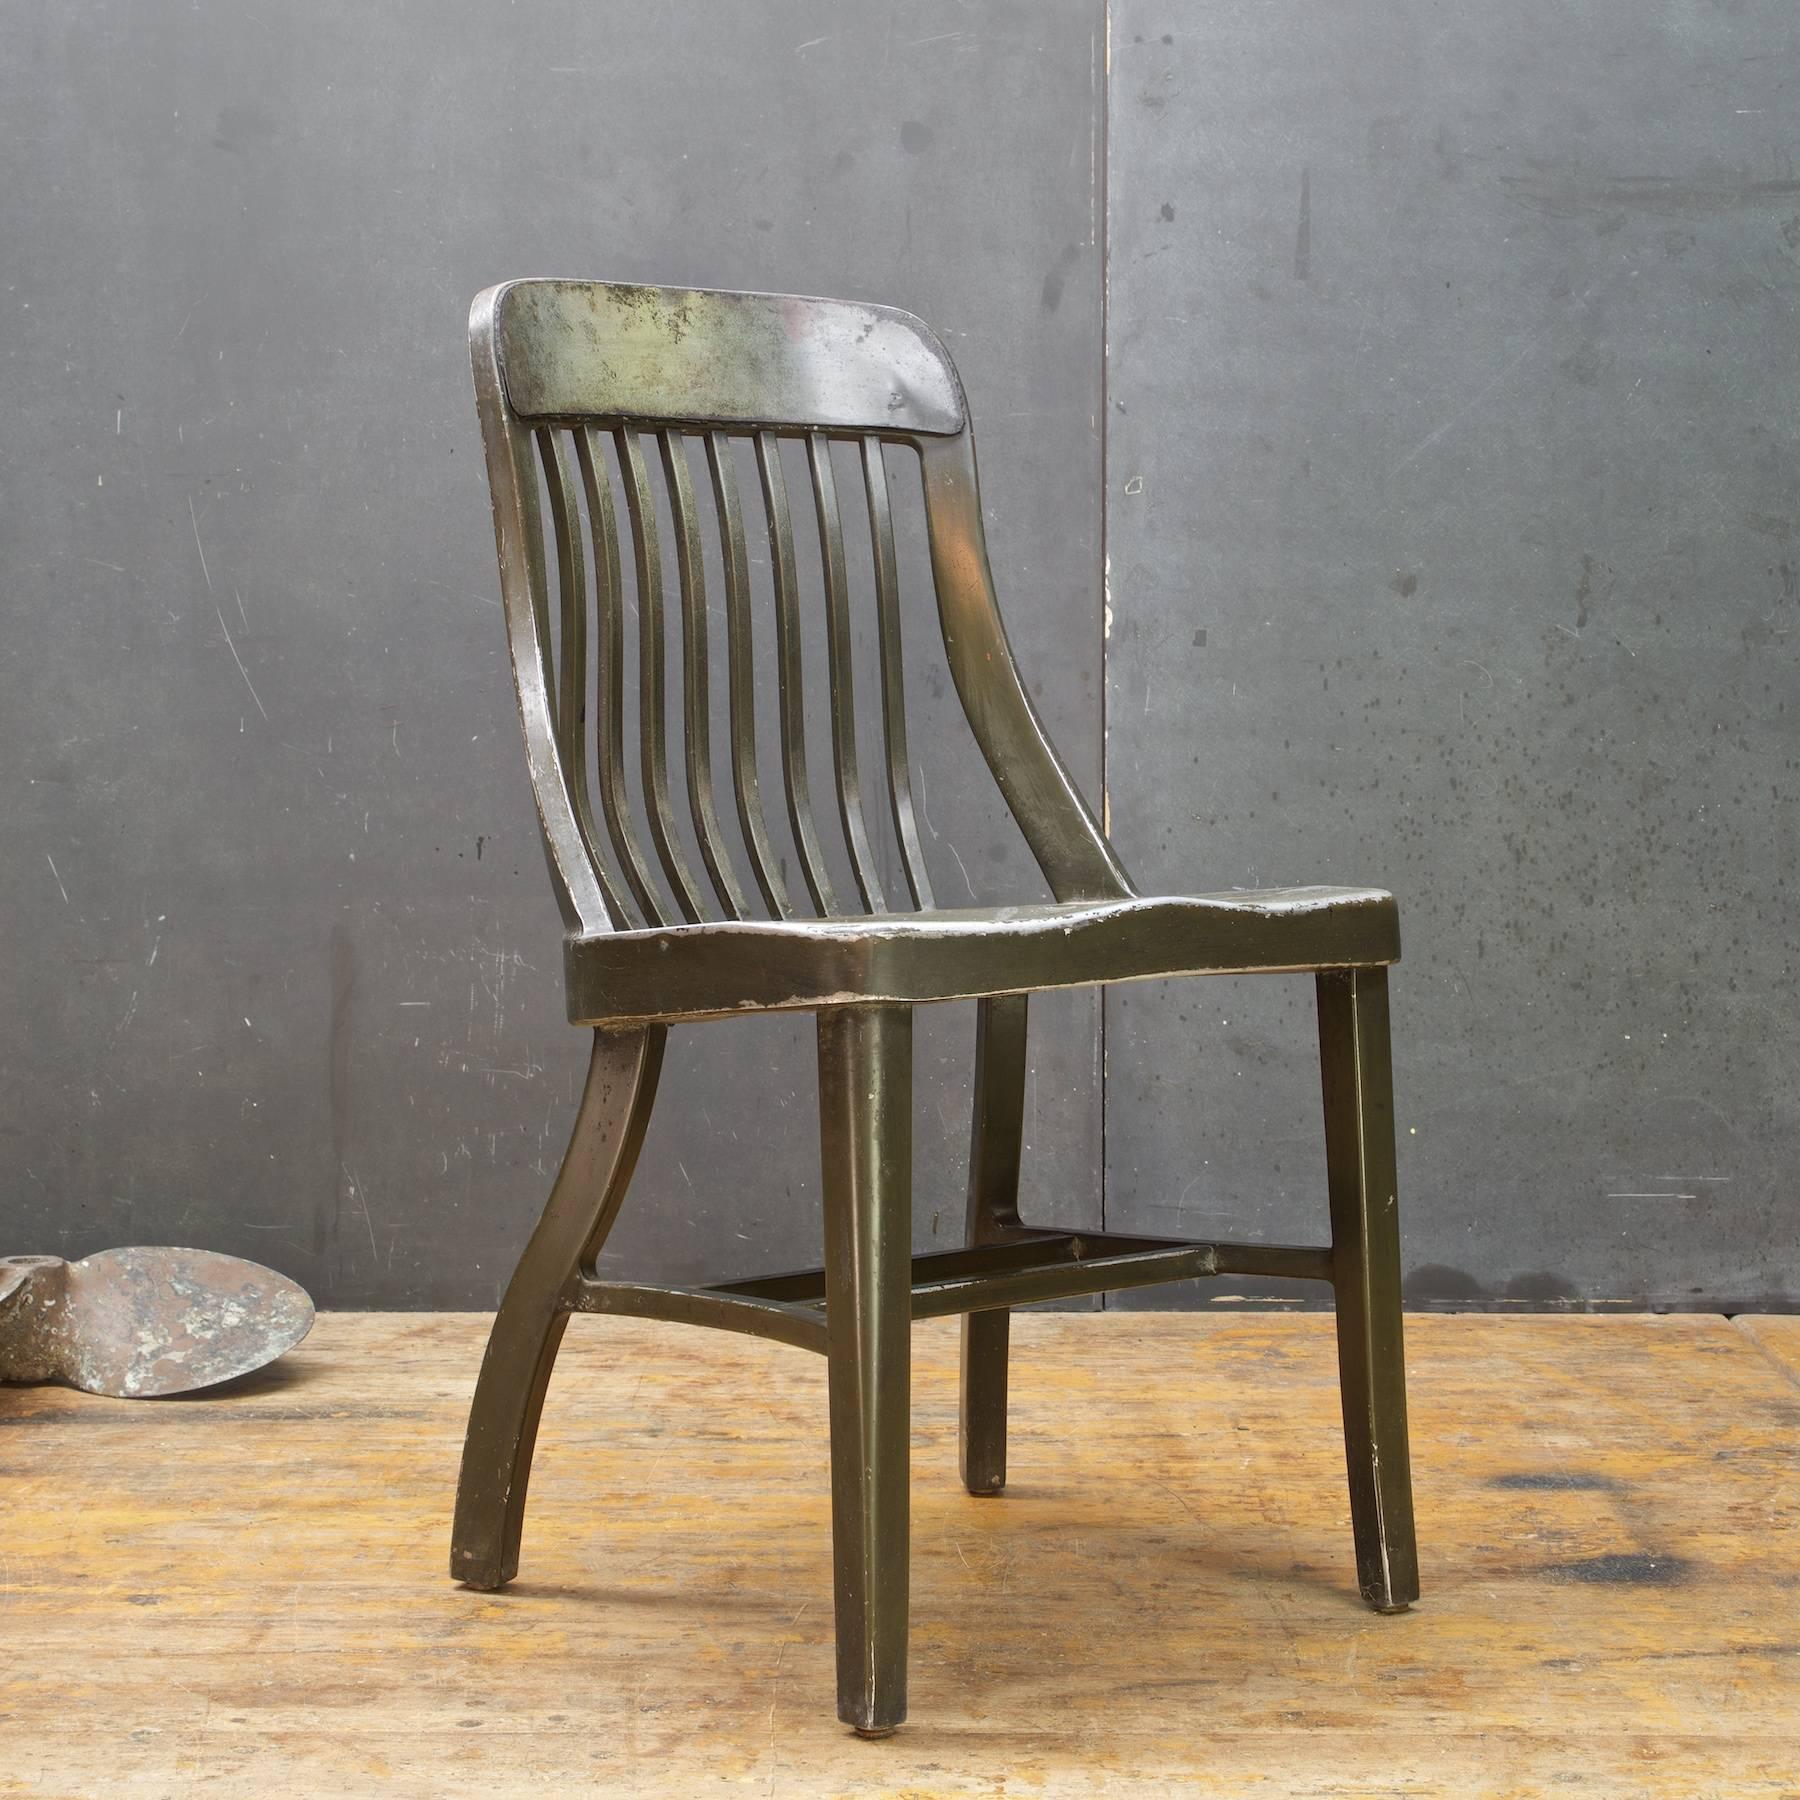 American 1930s US Barracks Metal Early Goodform Chair by General Fireproofing